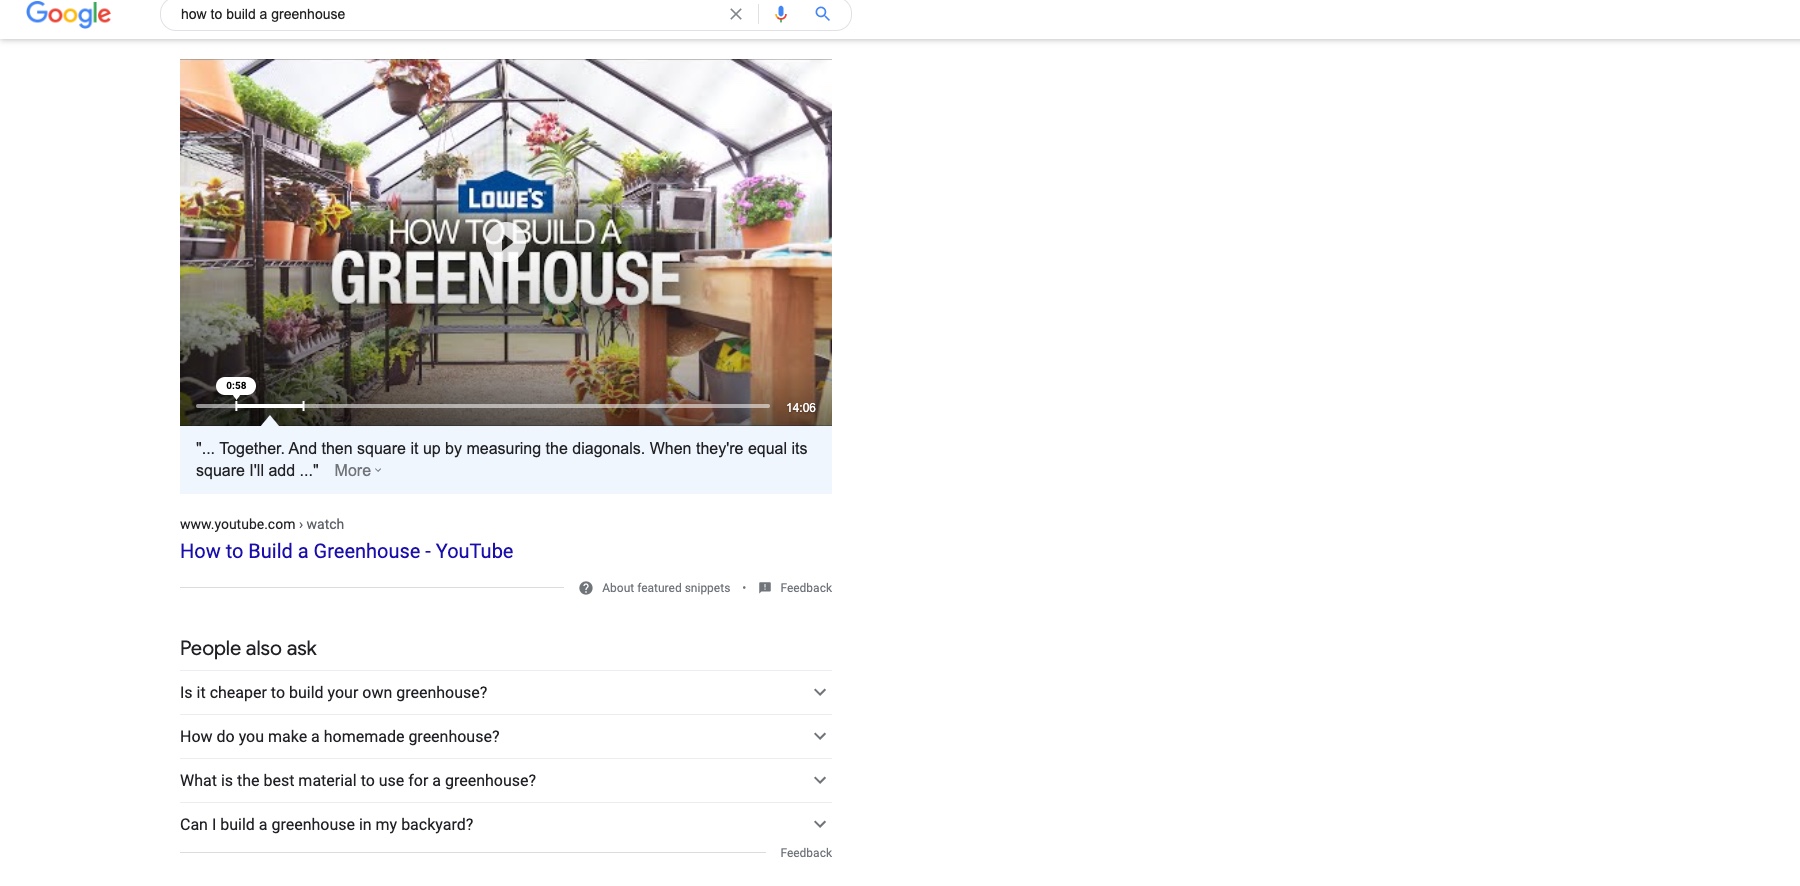 Featured Snippet Google Search on How to Build a Greenhouse